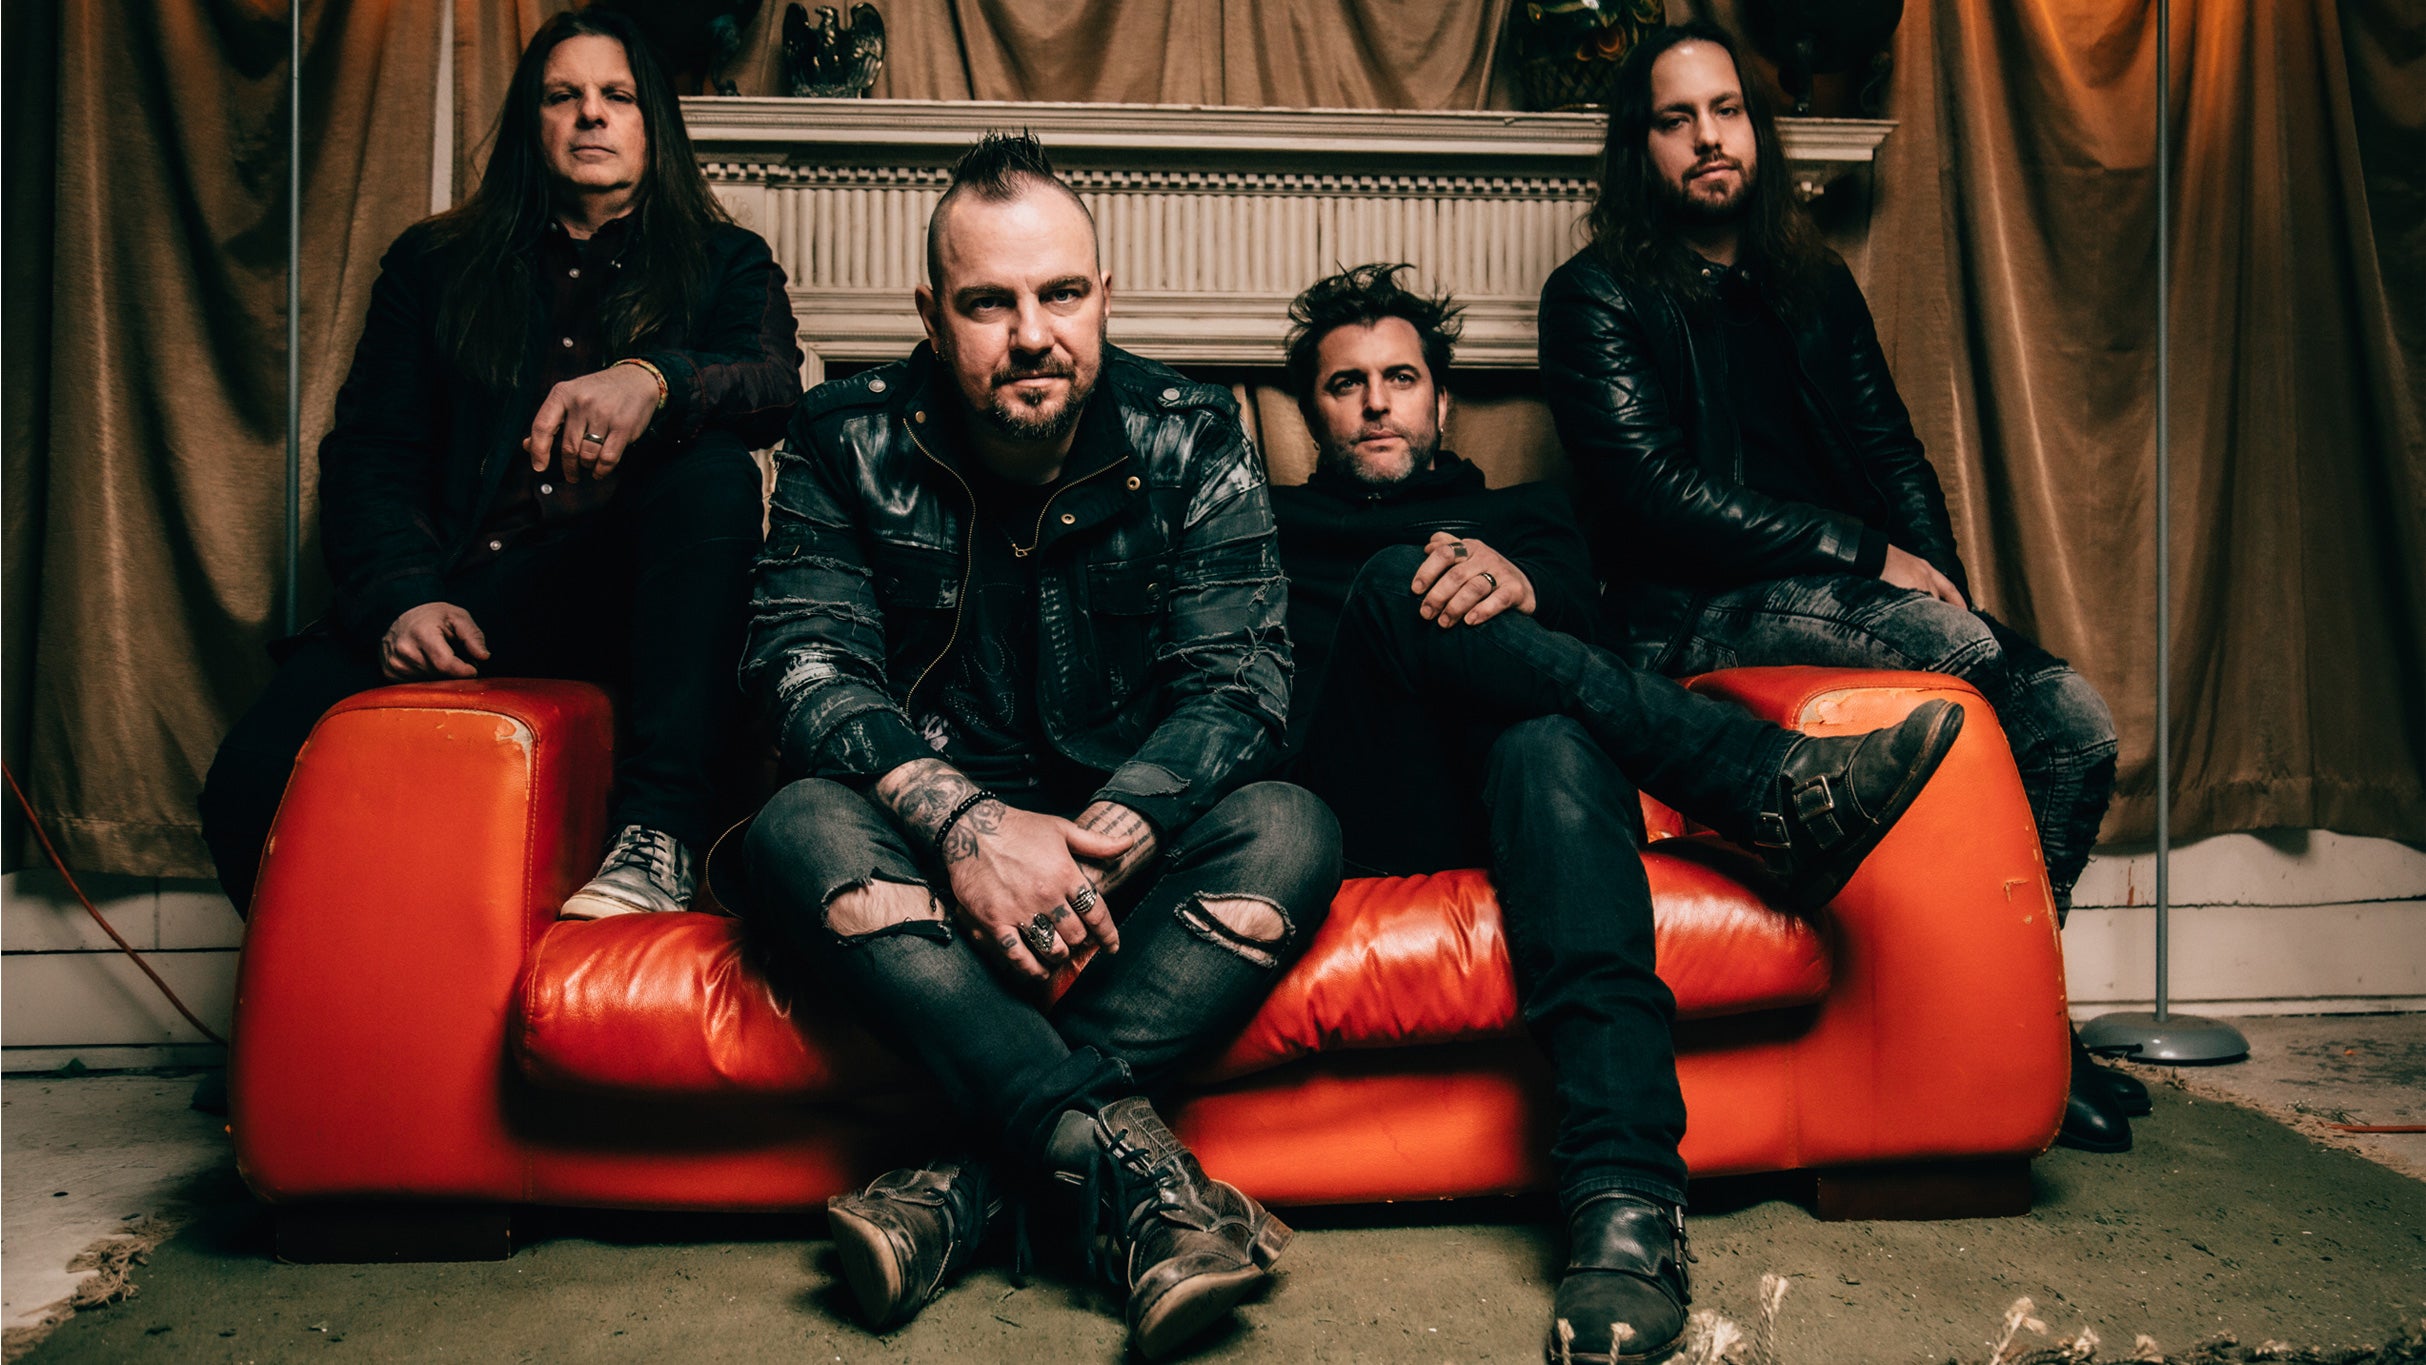 Saint Asonia presale code for real tickets in Columbia